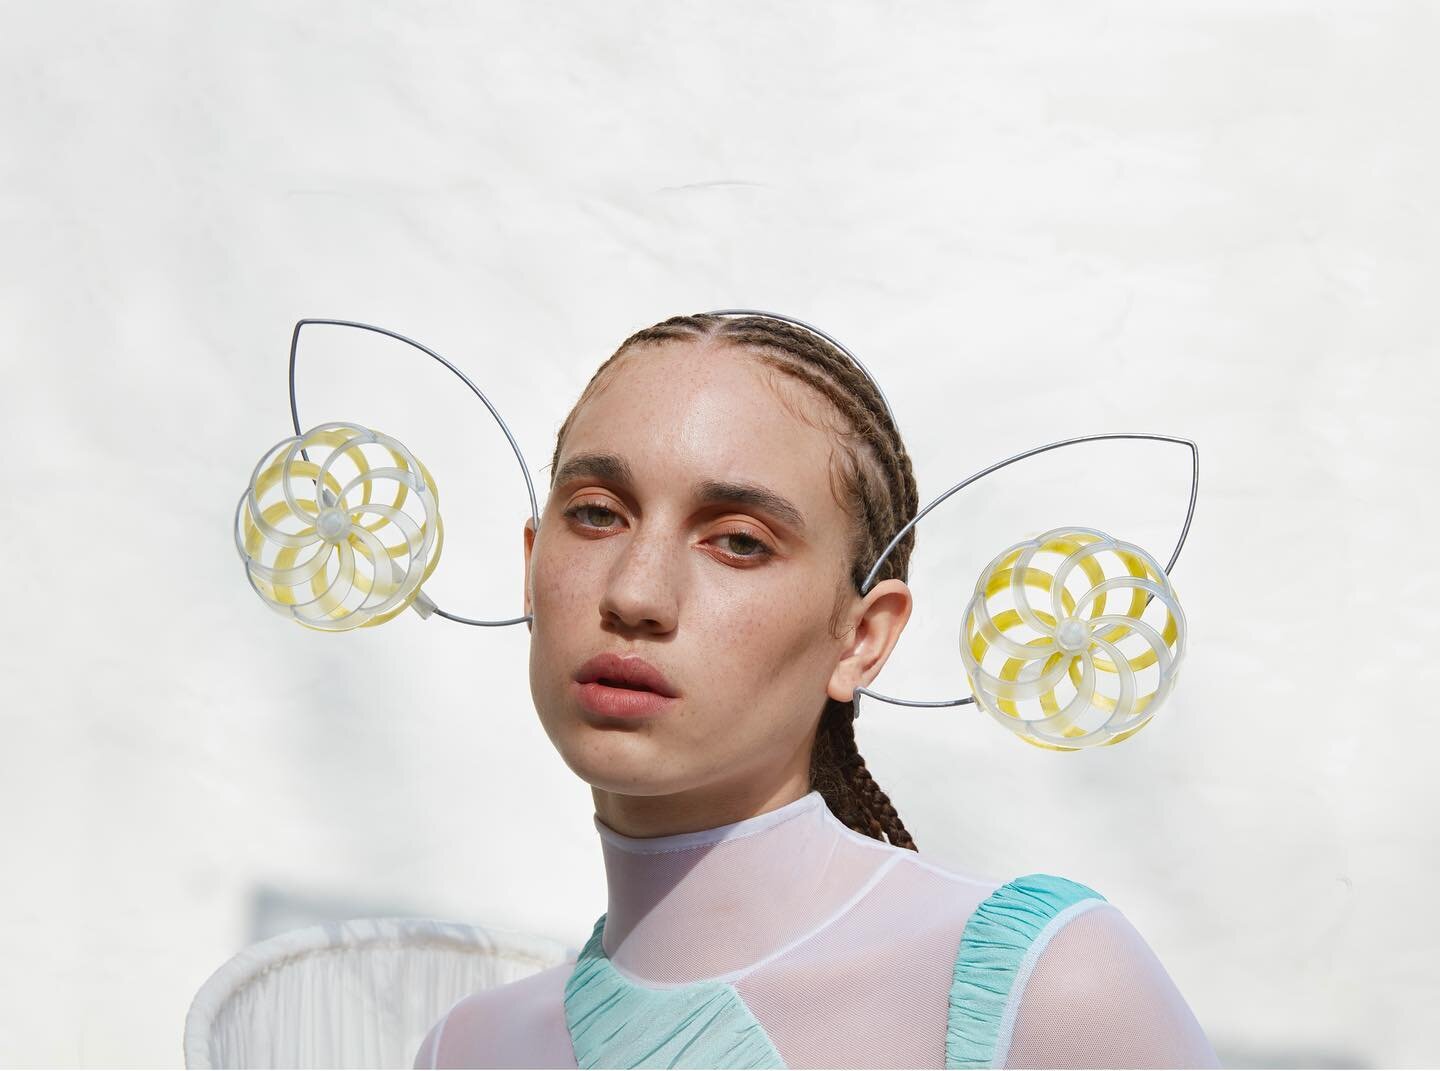 The Hypnosis Earpiece 🔆🔅

Rotating into illusion patterns when driven by wind 🔆🔅

WINDFARBE featured on @theperfectmagazine! 

Thank you to the team:
Muse: @georgiamoot 
Makeup: @kyledominicc 
MUA assitant: @craighamiltonartistry 
Hair: @palberda